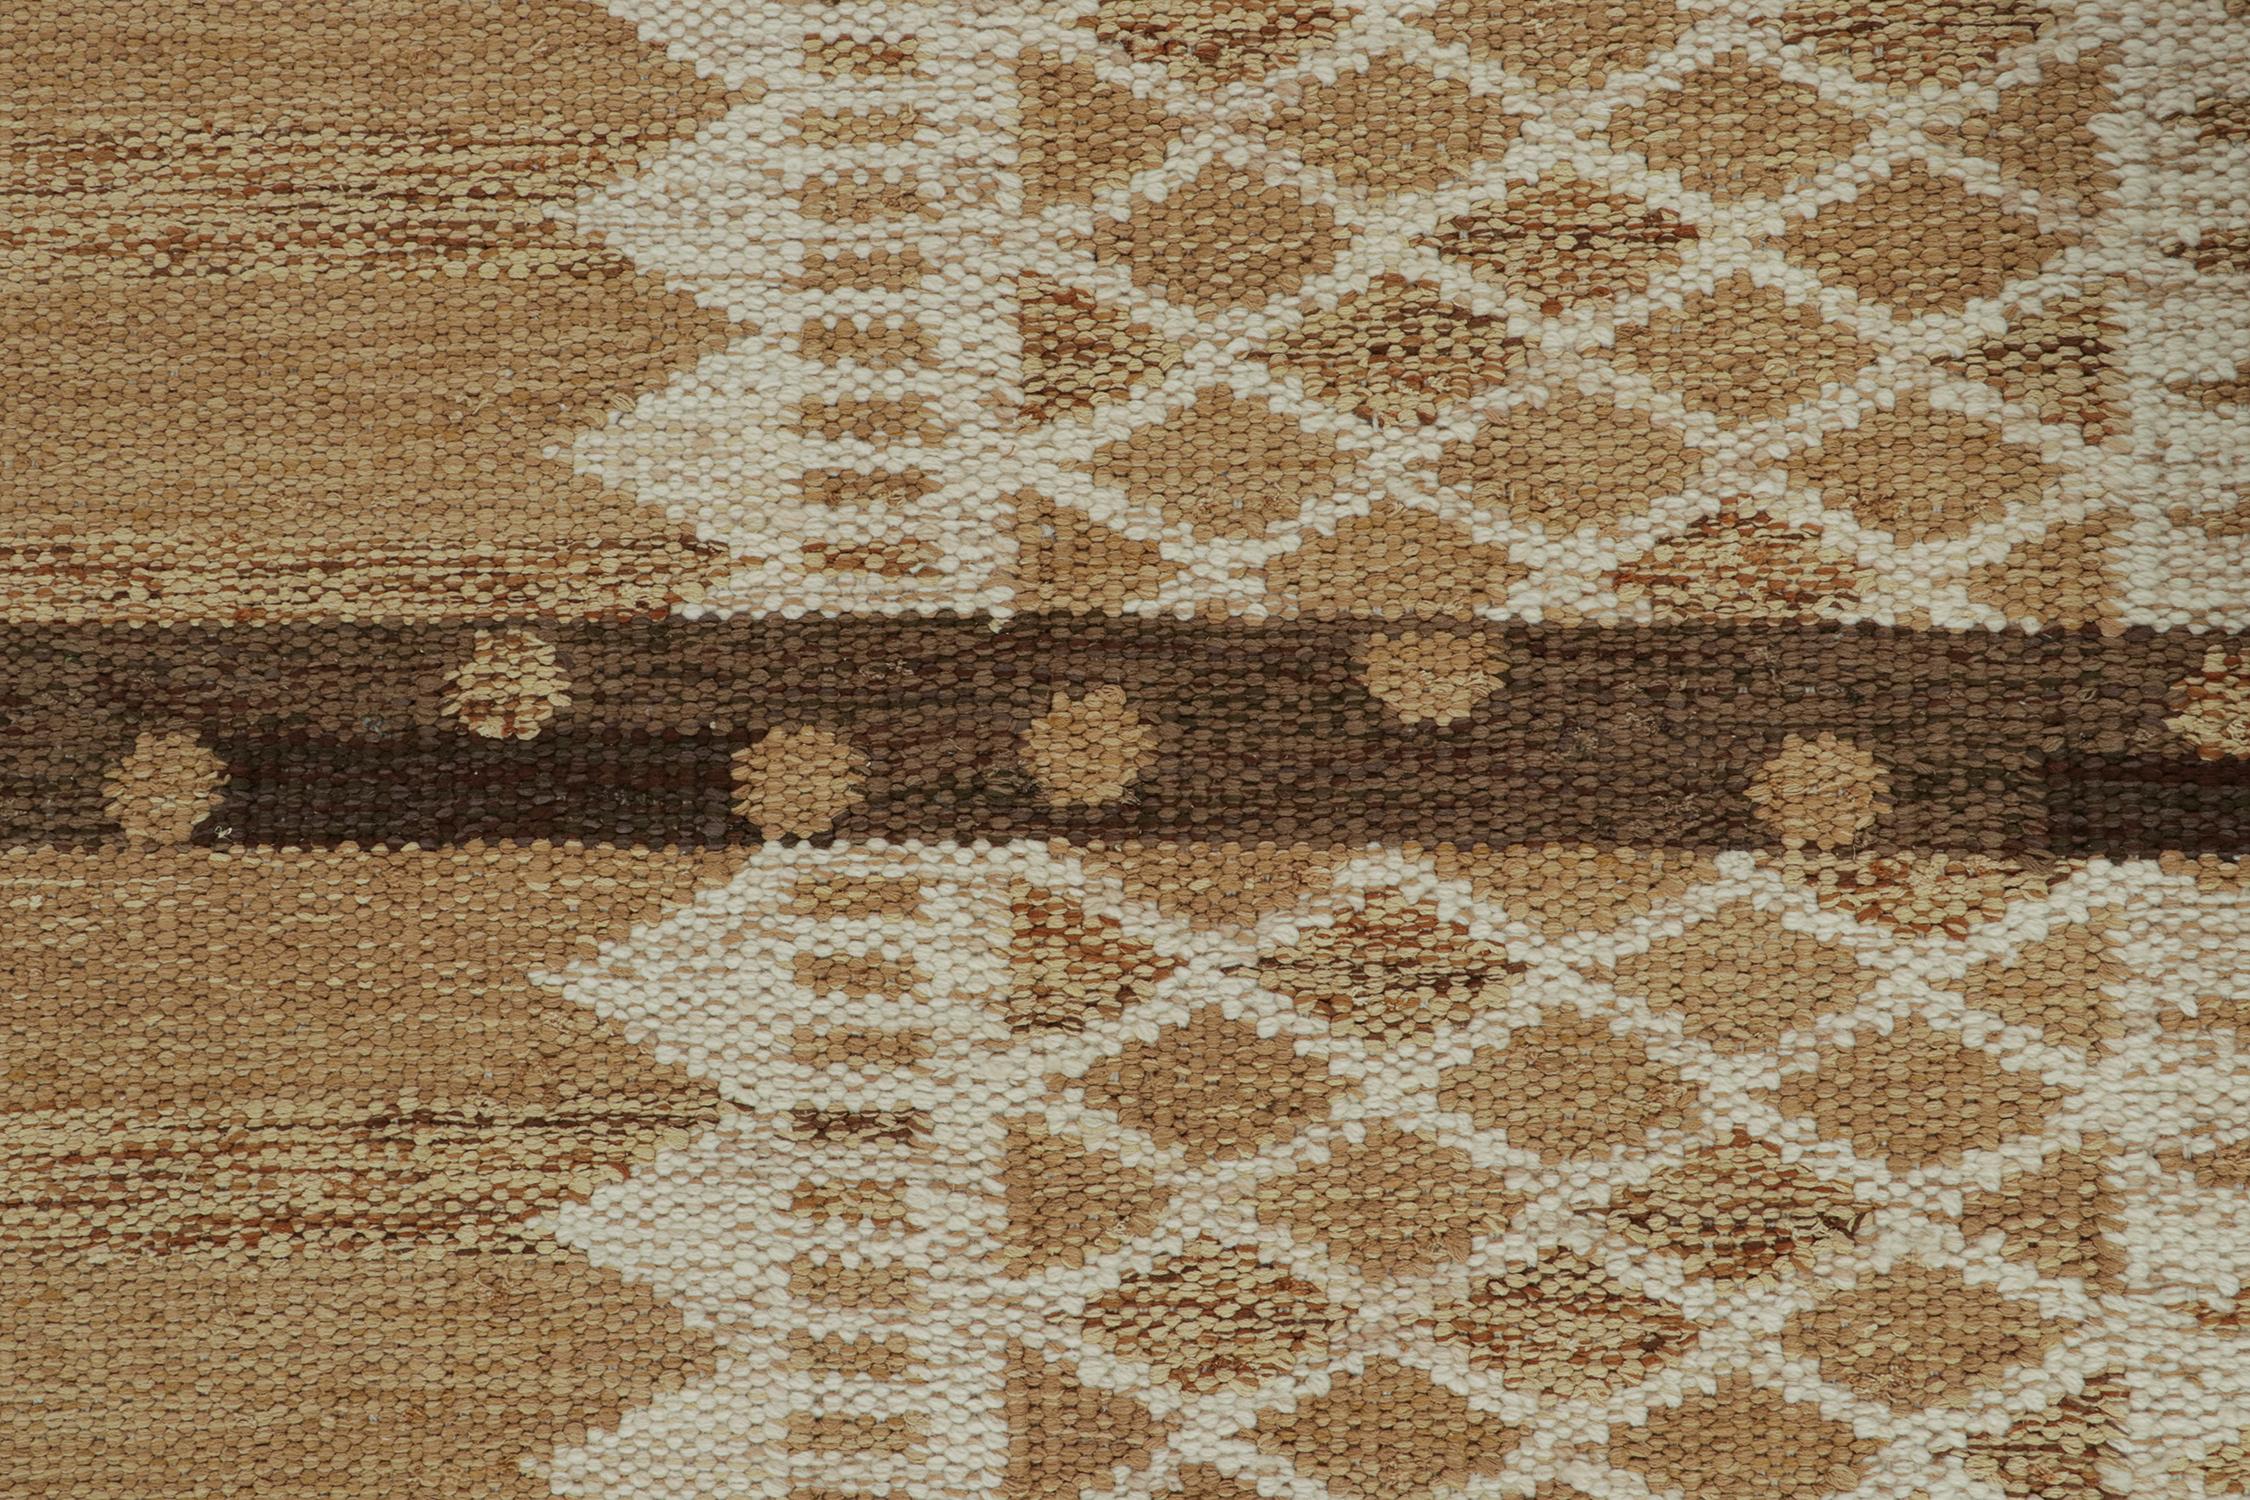 Rug & Kilim’s Scandinavian Style Kilim in Beige-Brown & White Geometric Pattern In New Condition For Sale In Long Island City, NY